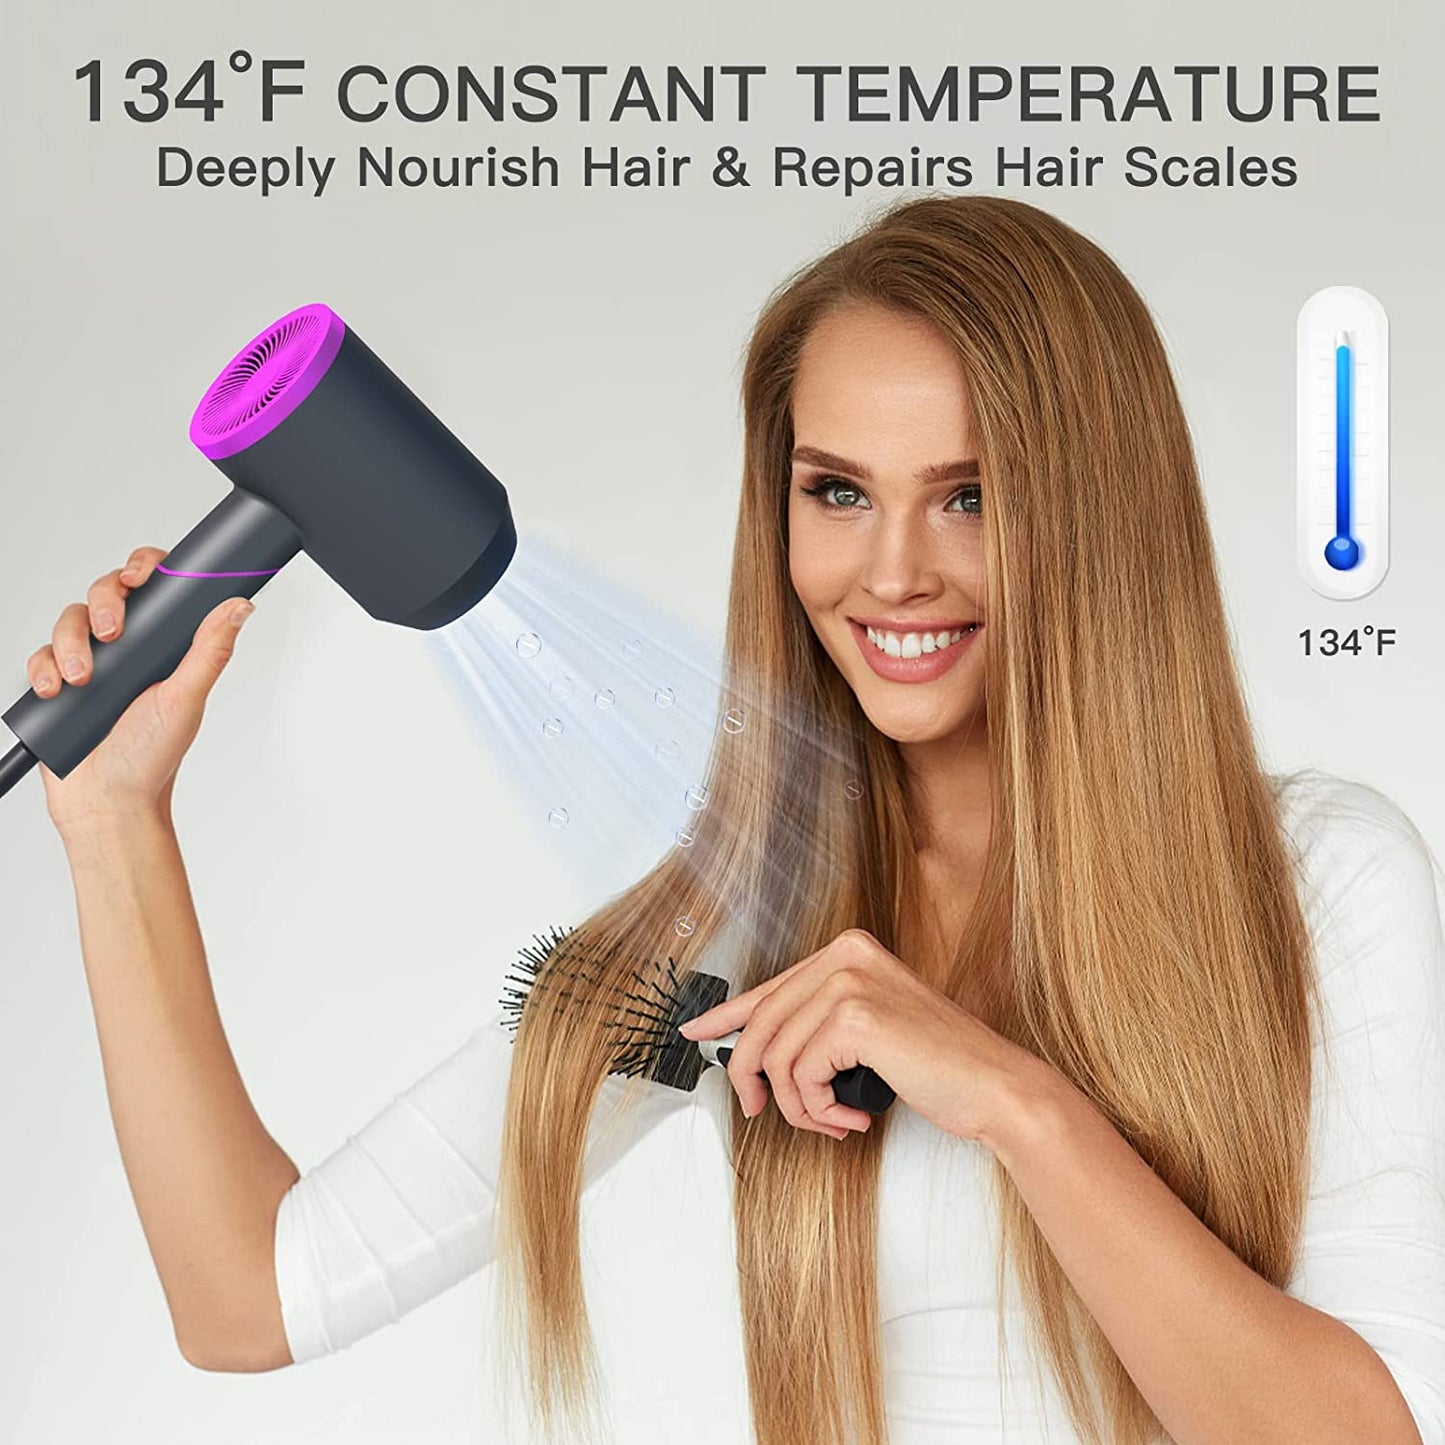 New Hair Dryer Blow Dryer with Diffuser - 1800W Professional Travel Ionic Hair Dryer